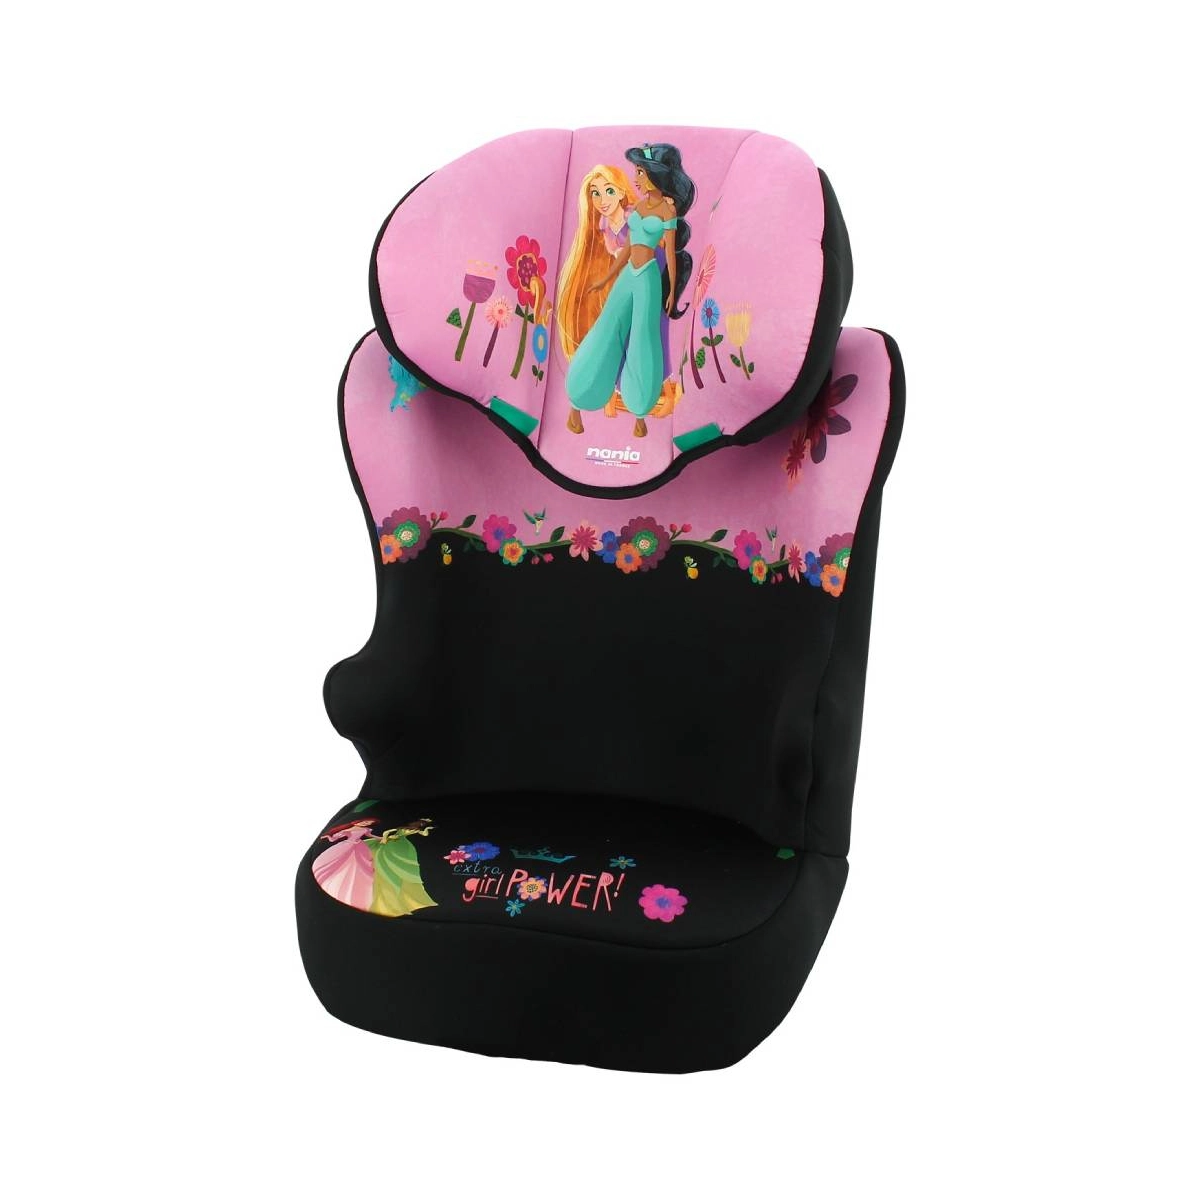 Nania Race I Disney Belt Fitted High Back Booster Group 1/2/3 Car Seat